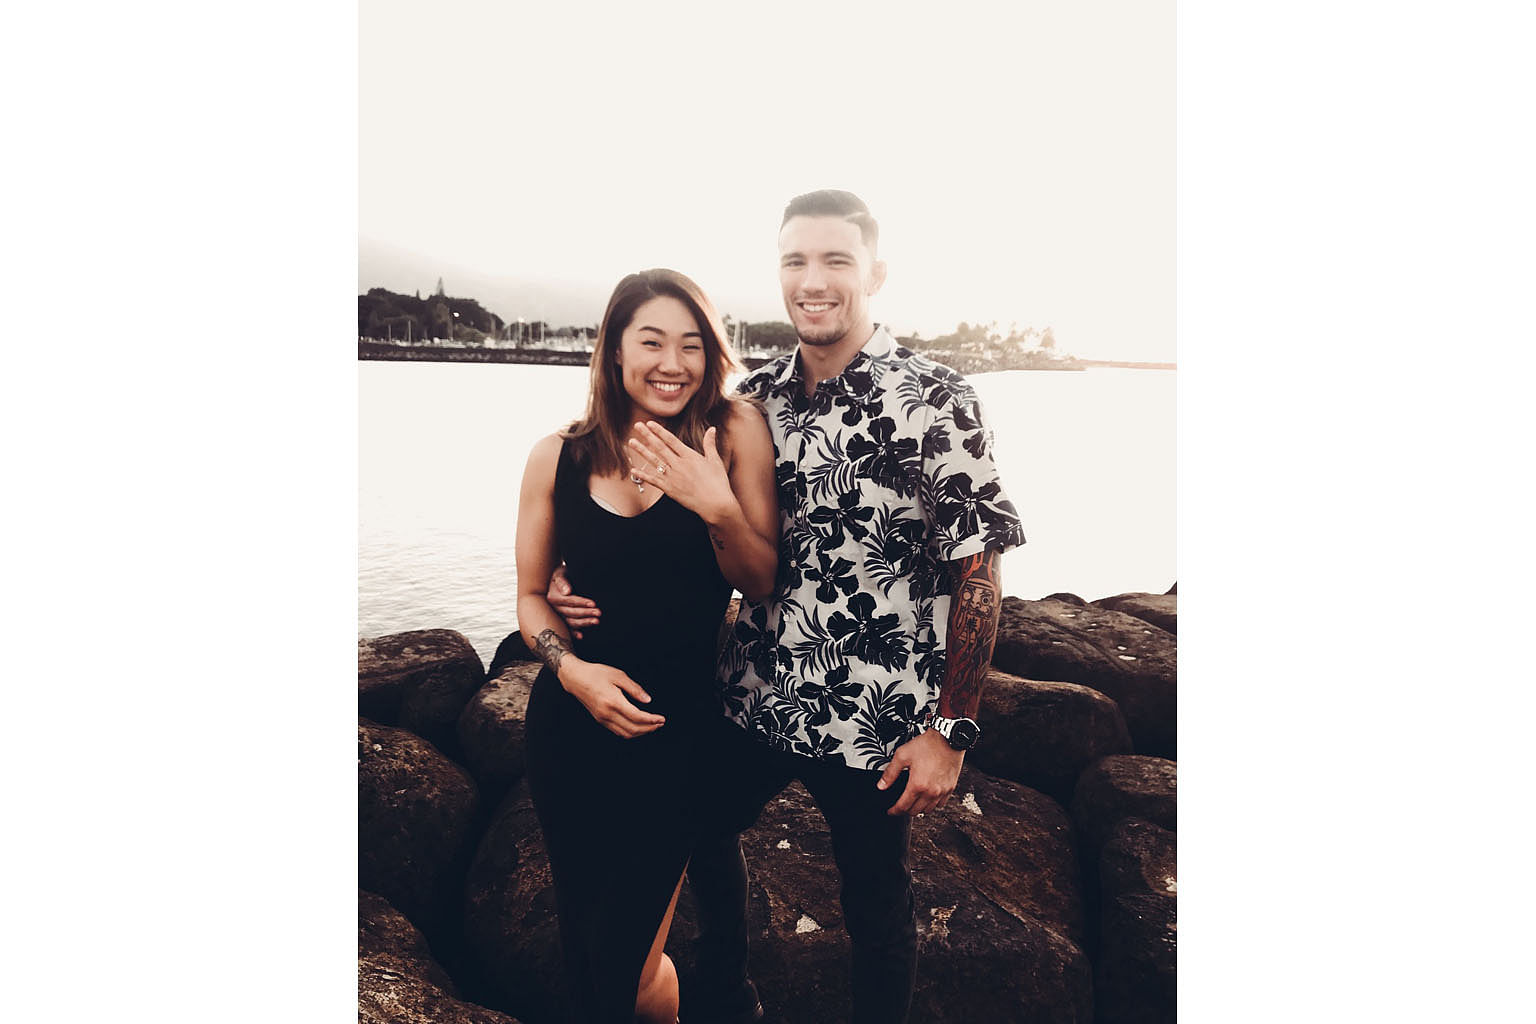 One Championship mixed martial arts exponents Angela Lee and Bruno Pucci celebrating their engagement in Hawaii.